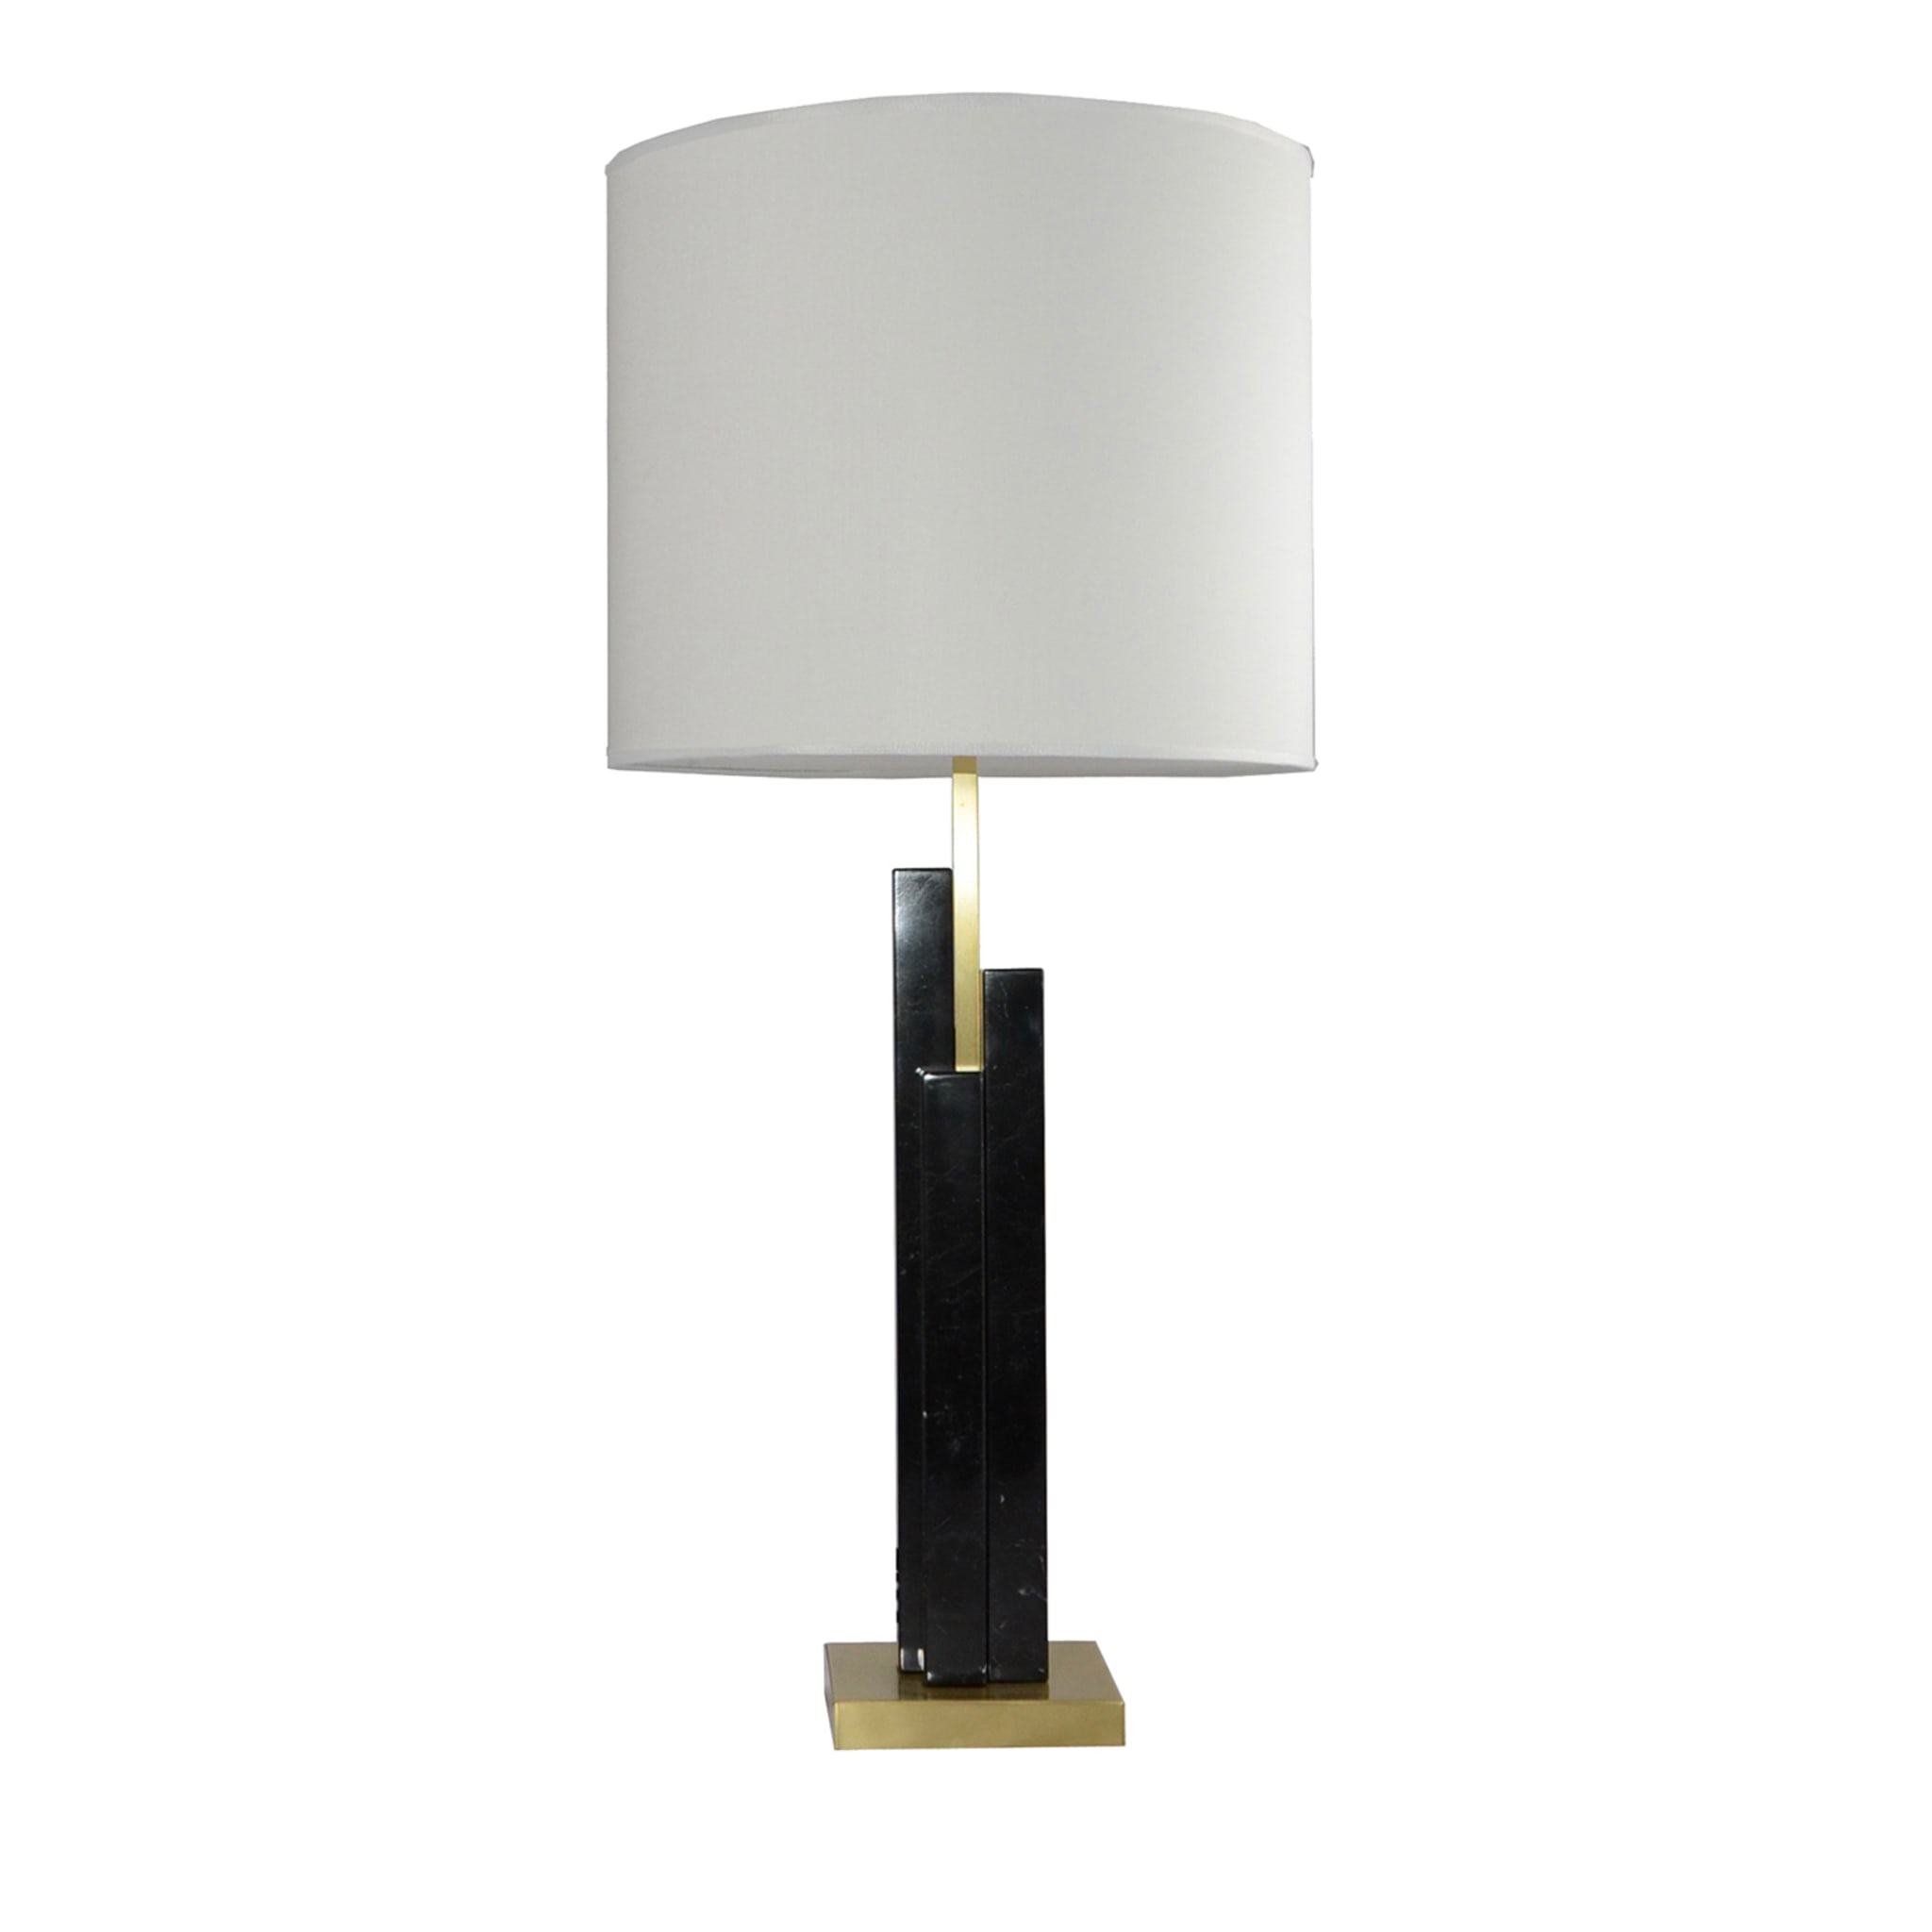 "Vintage Skyline" Table Lamp in Marquinha Marble and Satin Brass - Main view